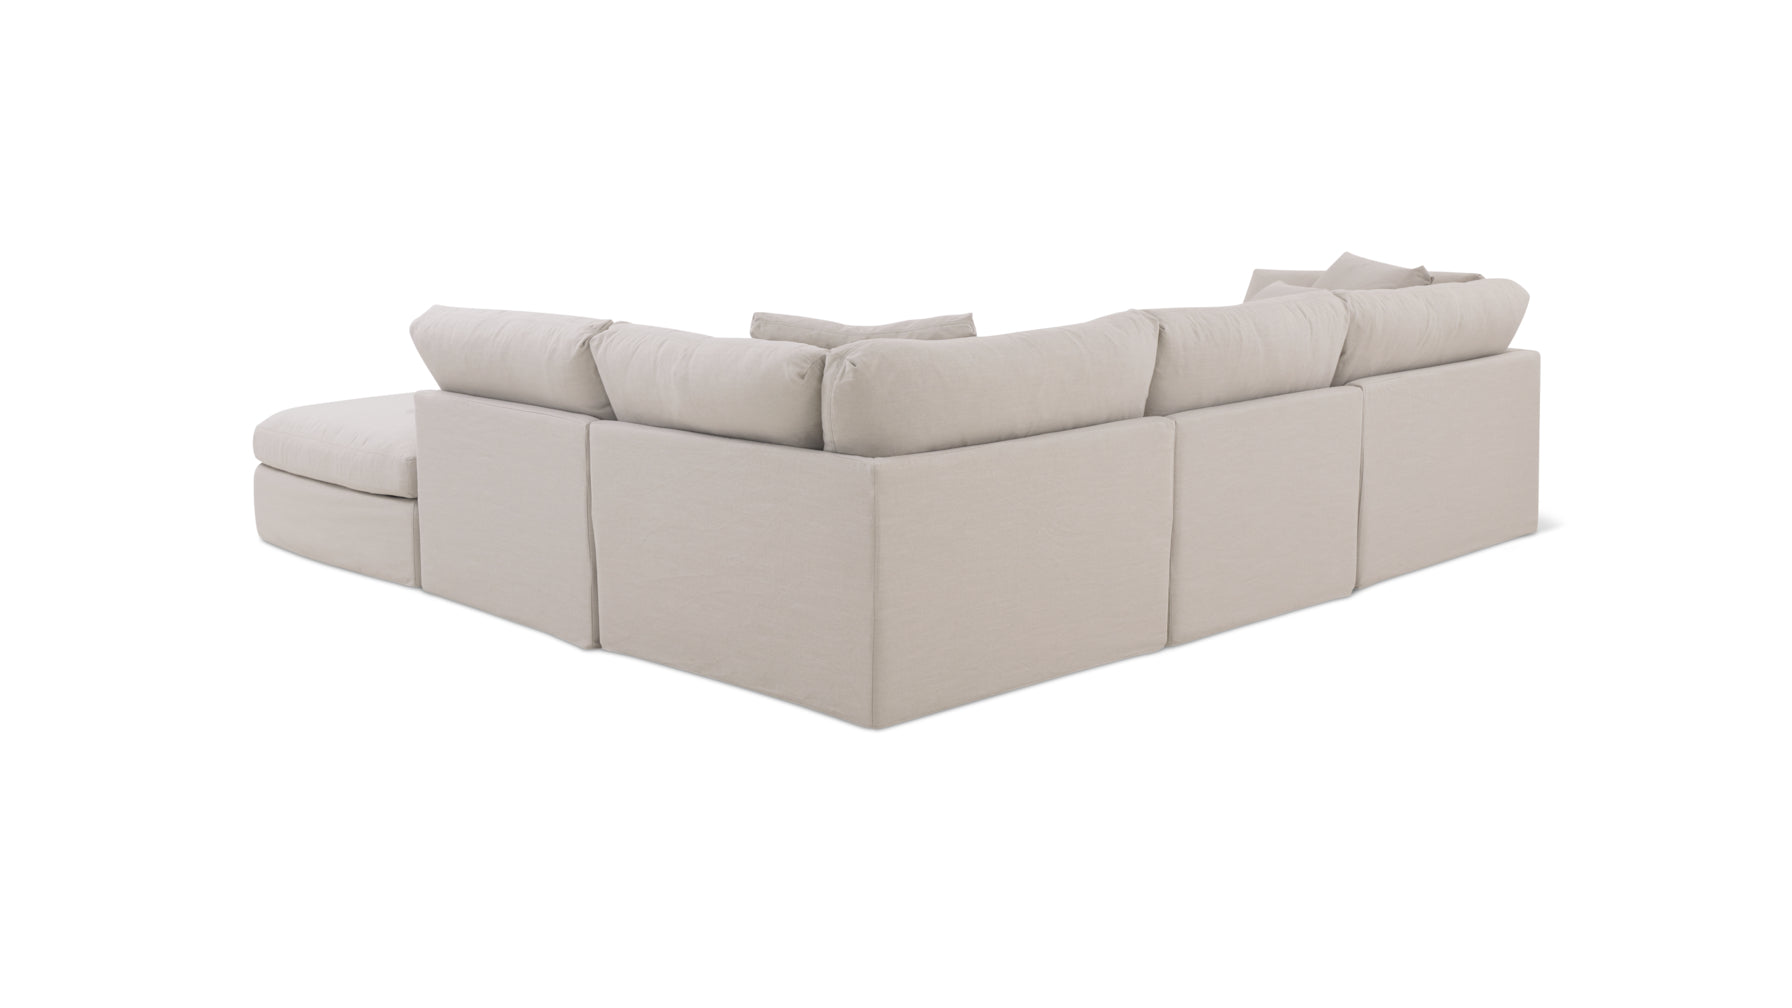 Get Together™ 5-Piece Modular Sectional, Large, Clay - Image 9